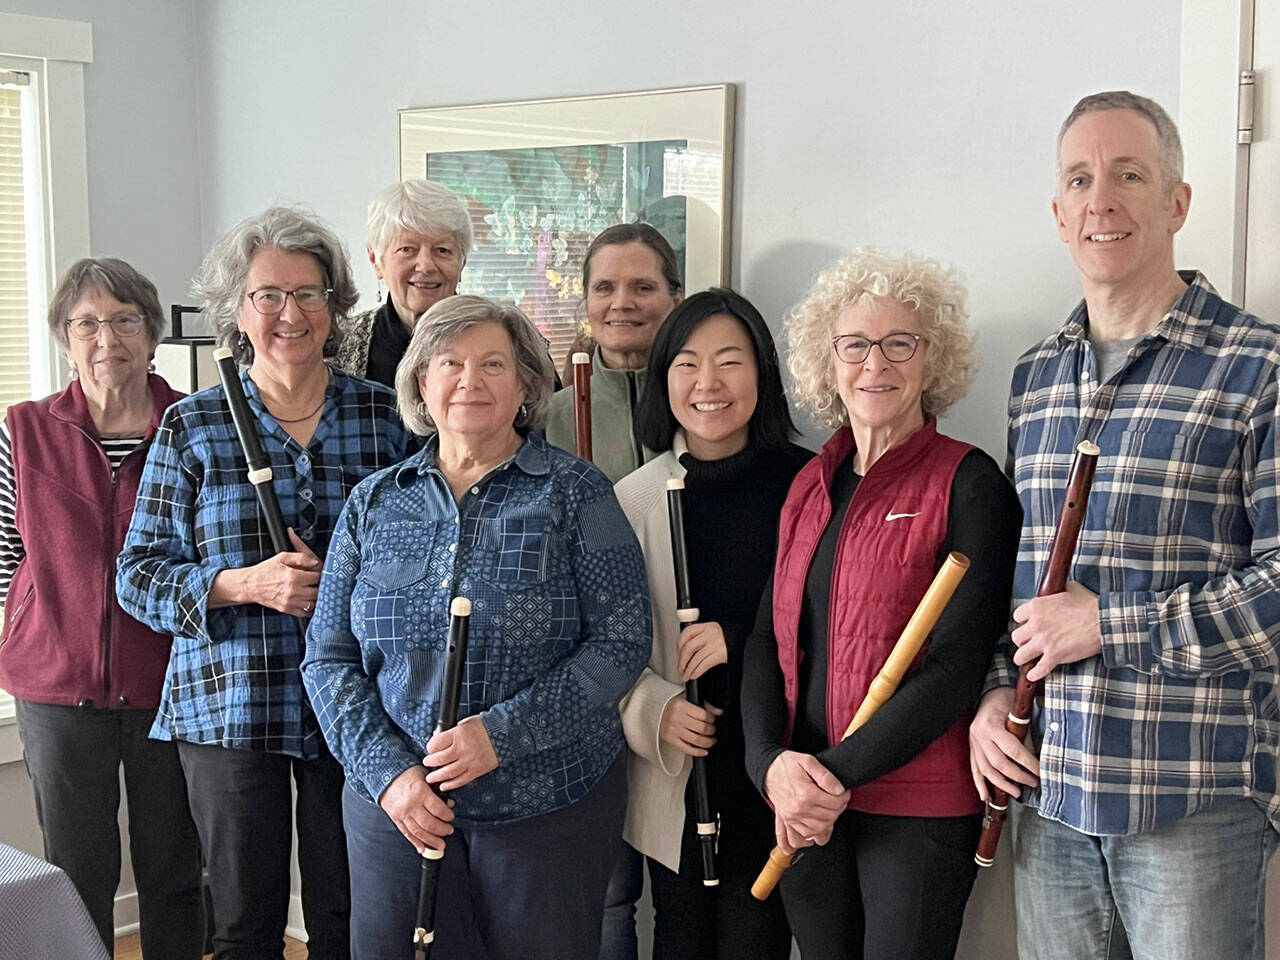 From left to right are flutists Mary Ann Hagan, Janet See, Molly Warner, Marty Ronish, Liz Hunter, Nayoung Ham, Carla Lawrence and Miguel Rodé.